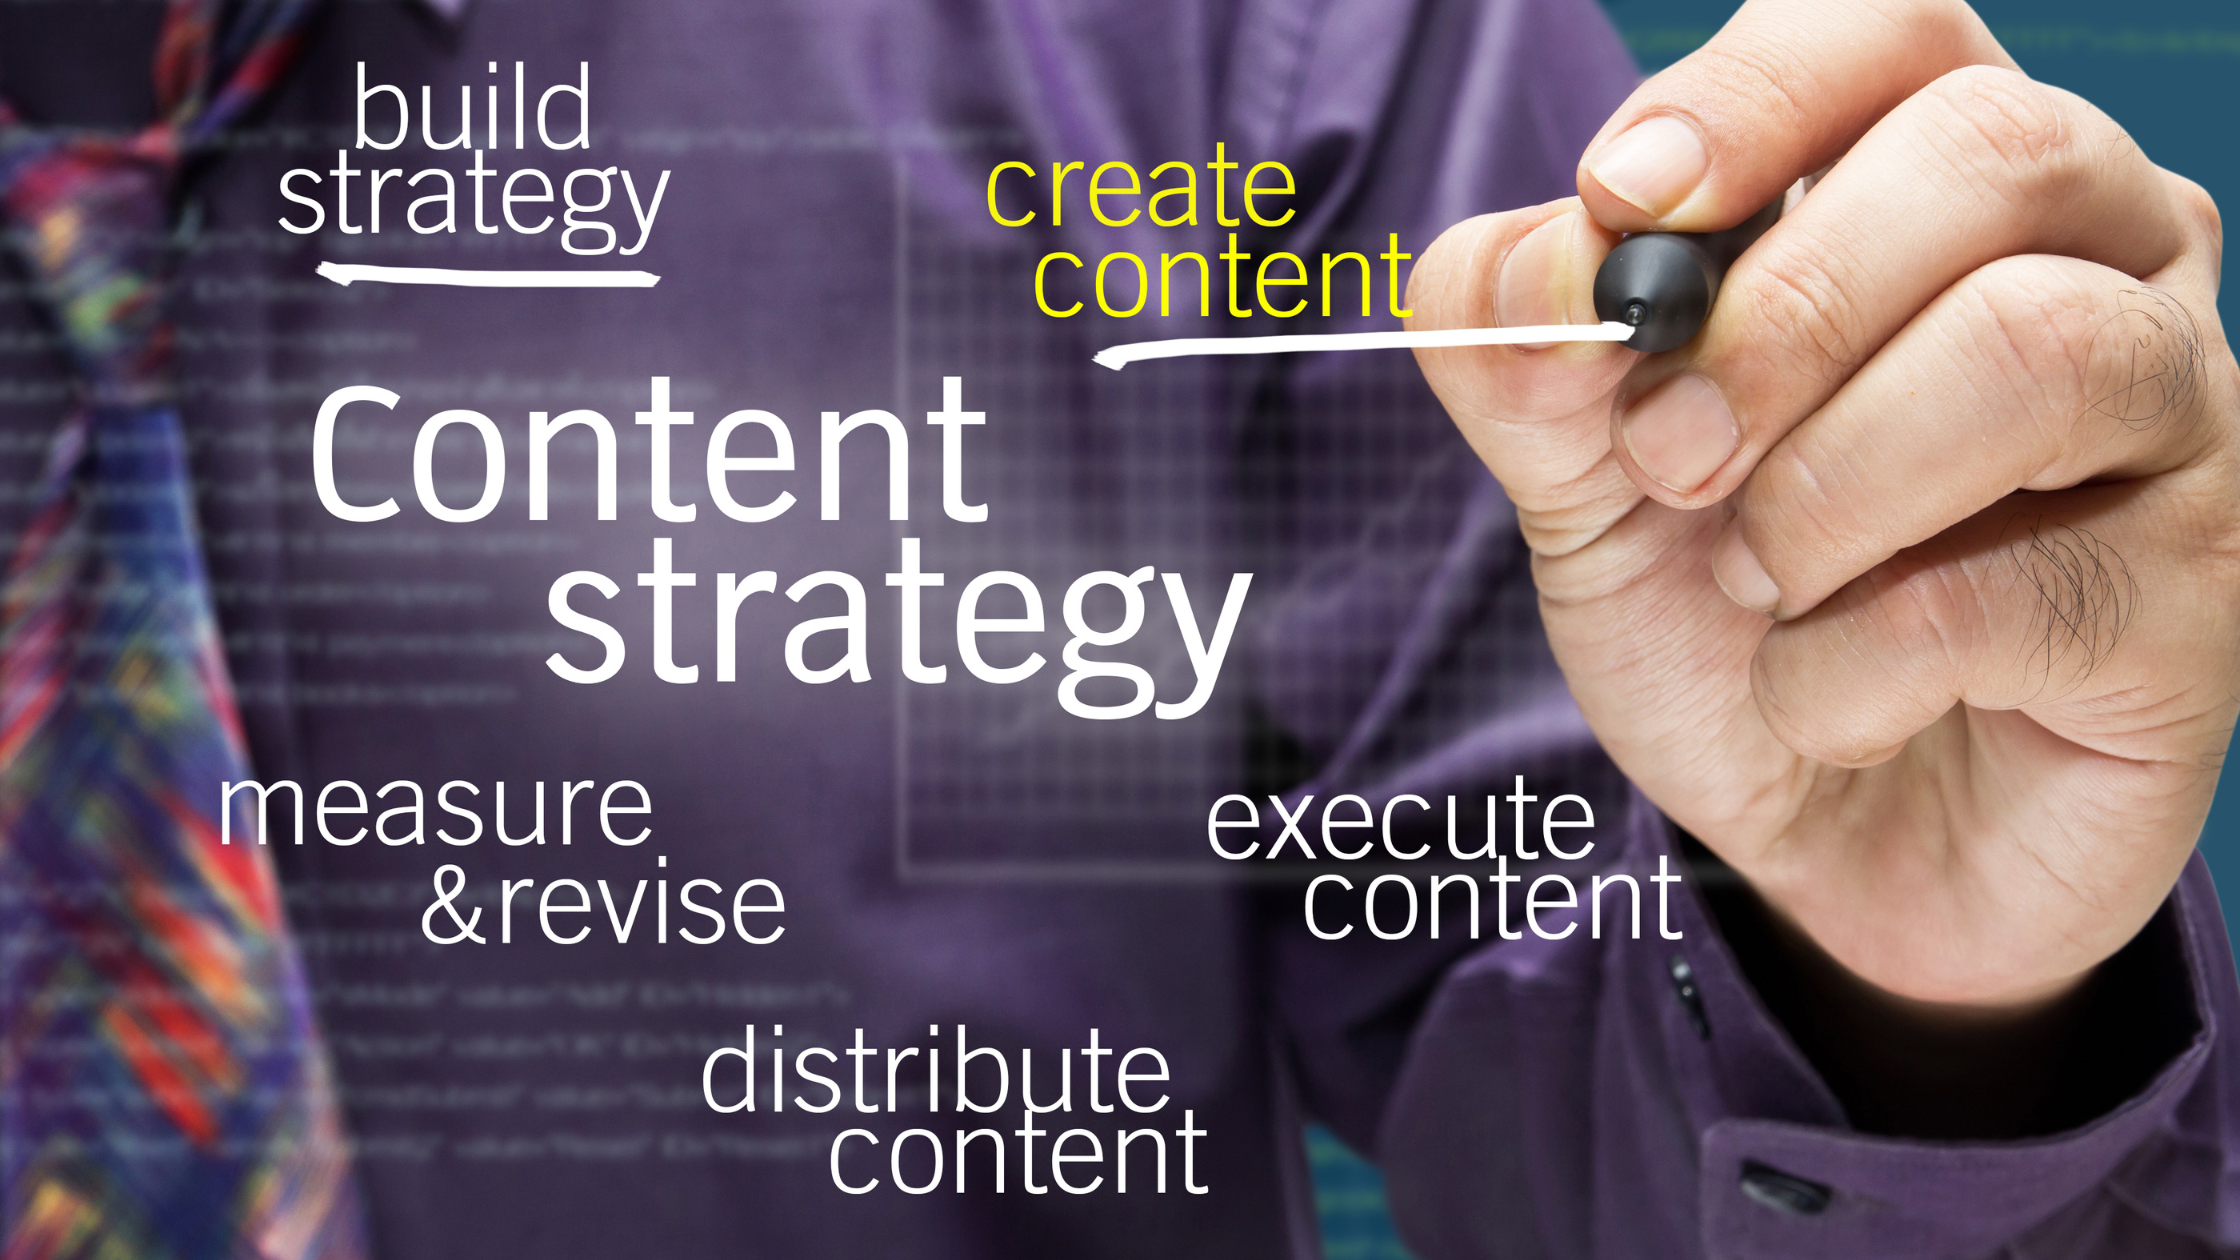 Develop a Content Strategy<br />
